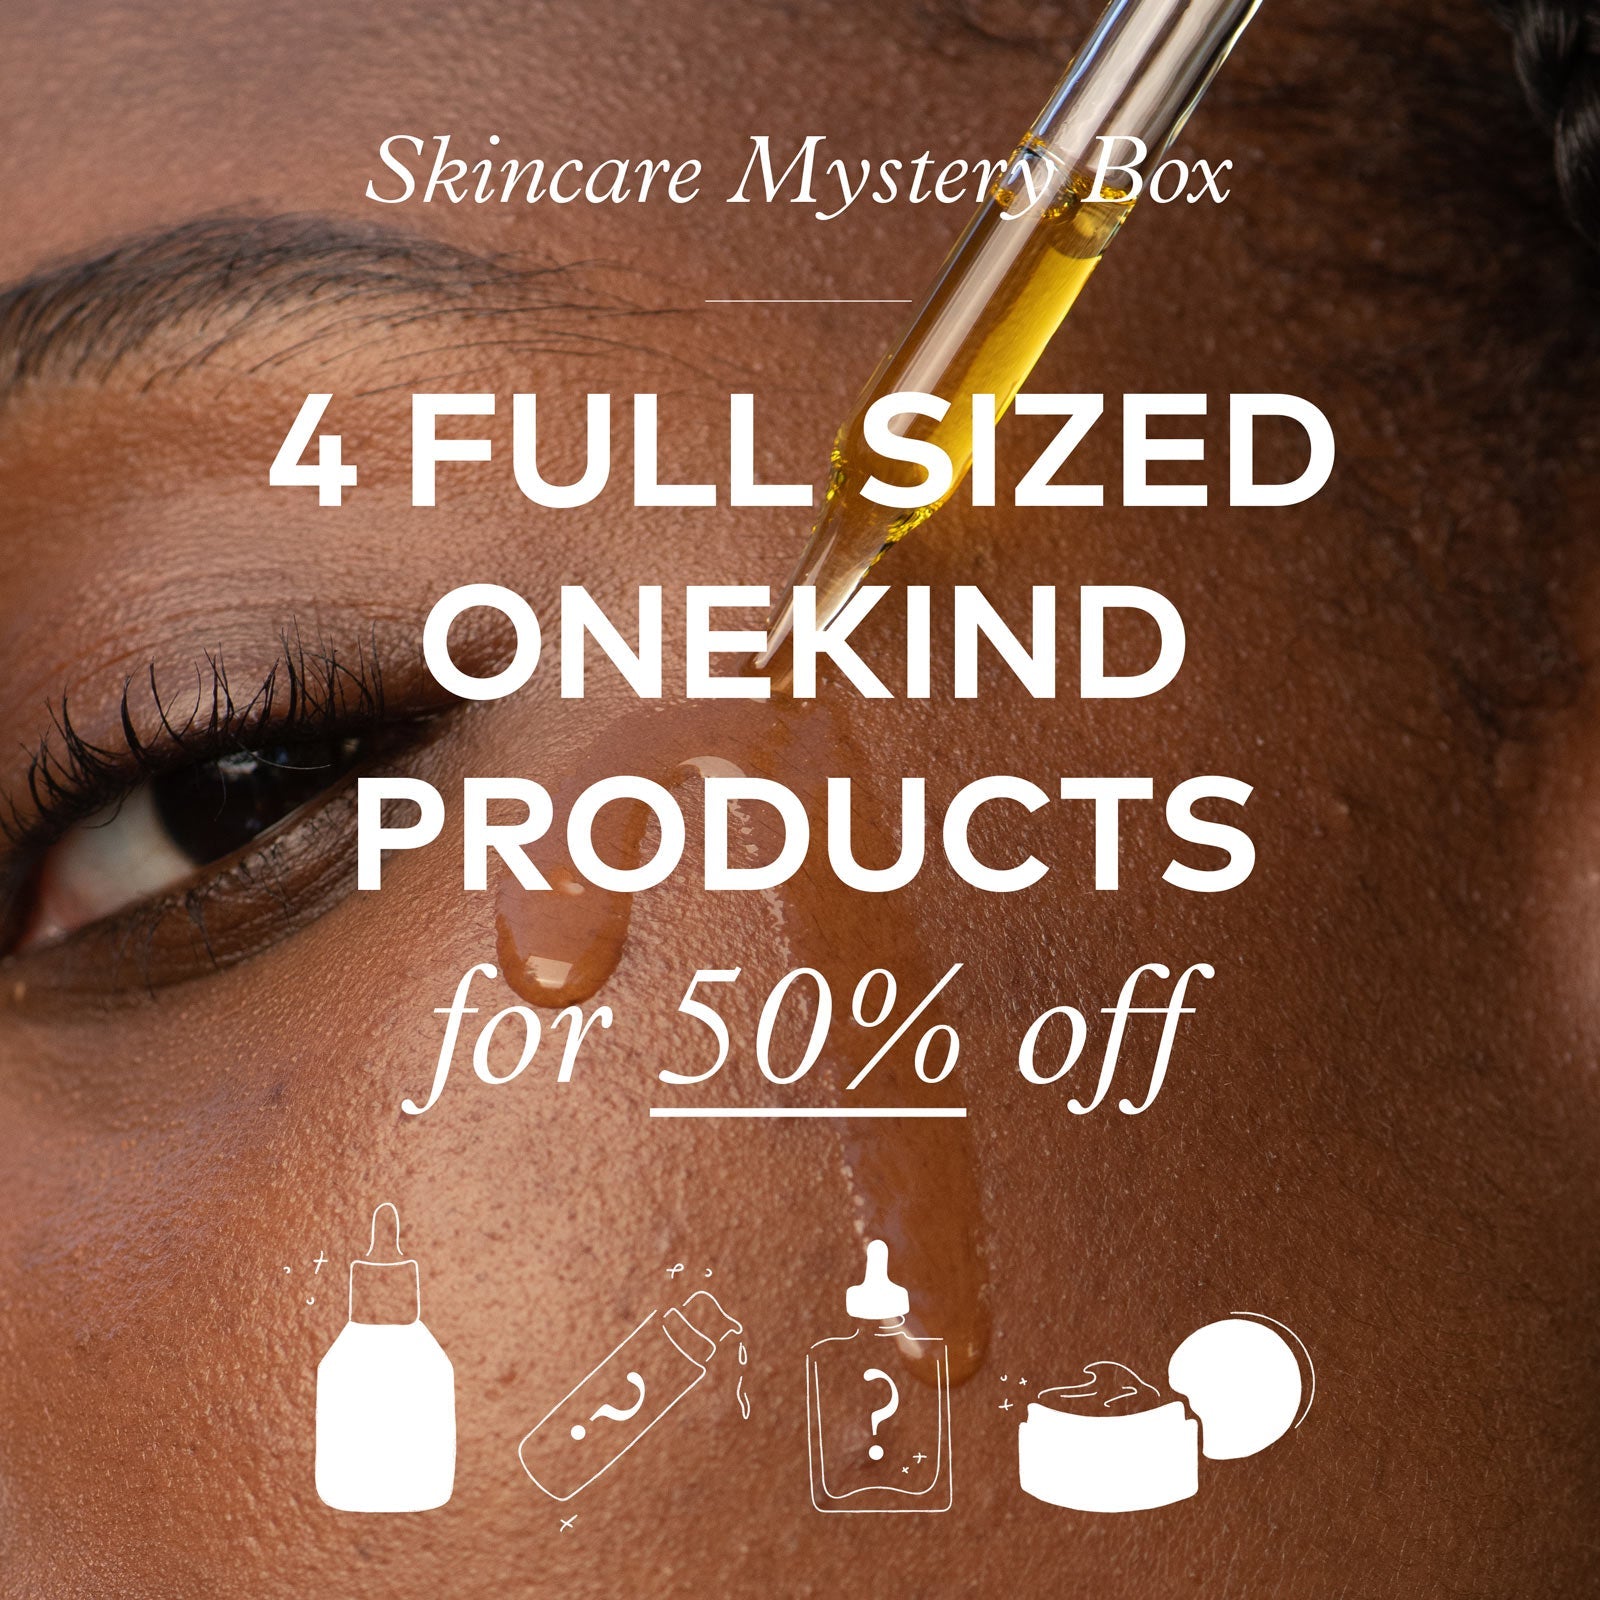 An image with a person applying face oil, and the text "Skincare mystery box. 4 full sized Onekind Products for 50% off"